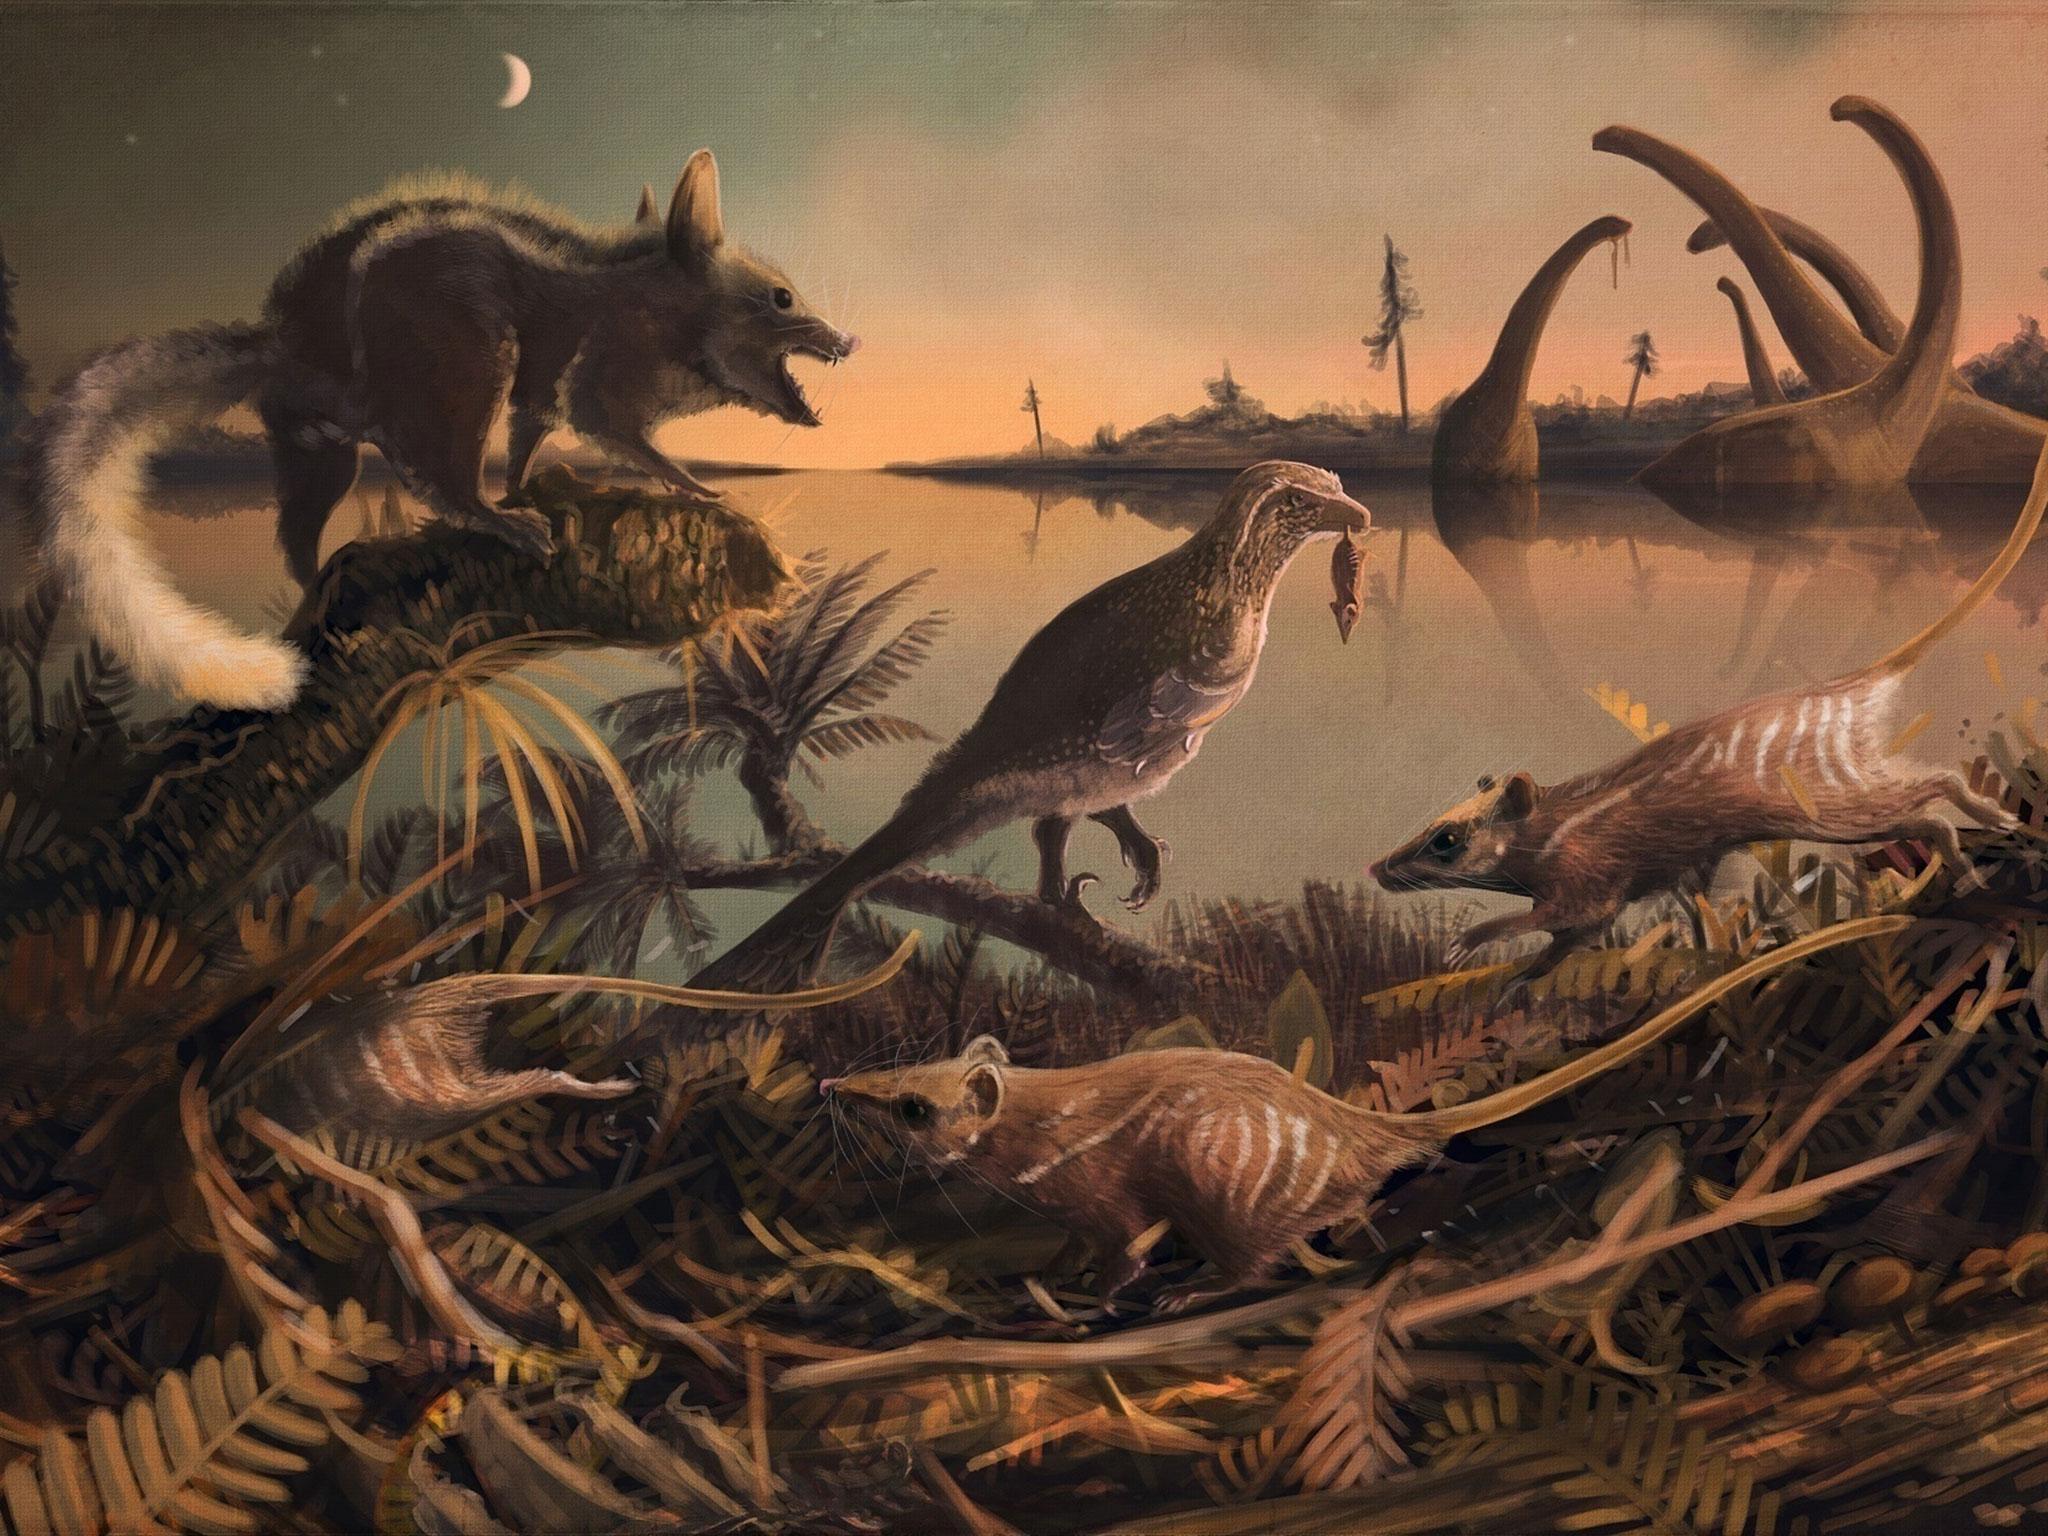 The small furry mammals scurried in the shadow of the dinosaurs 145 million years ago